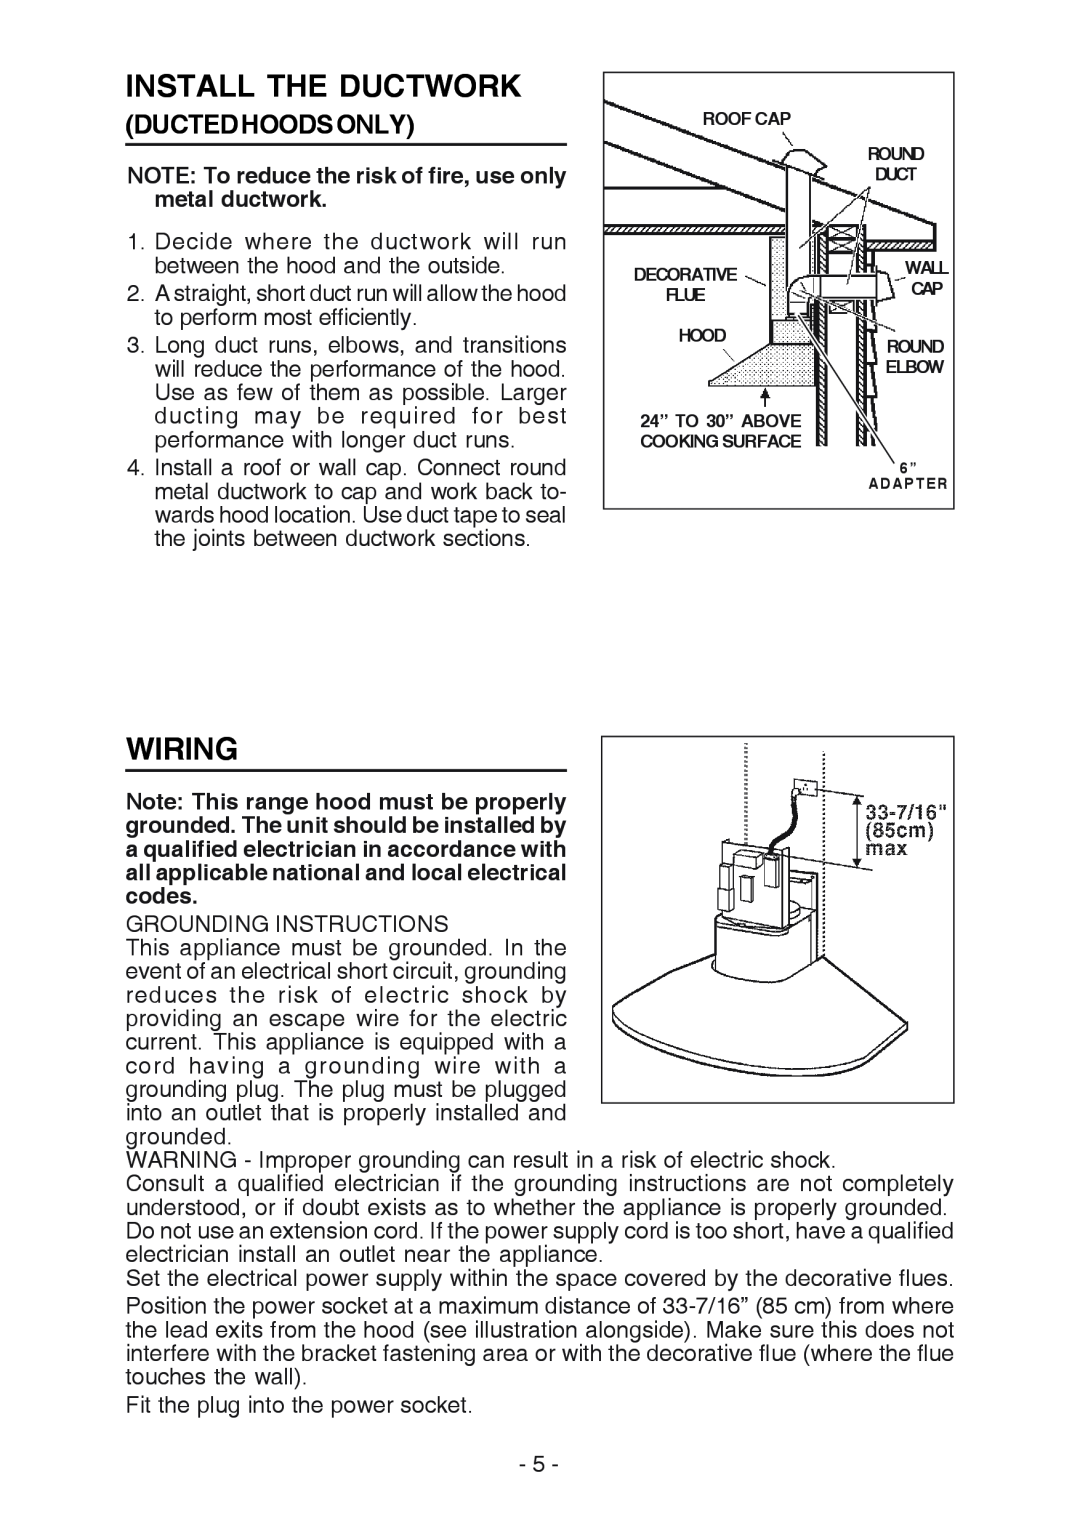 Broan RM524204 Install The Ductwork, Wiring, Ductedhoodsonly, NOTE To reduce the risk of fire, use only metal ductwork 